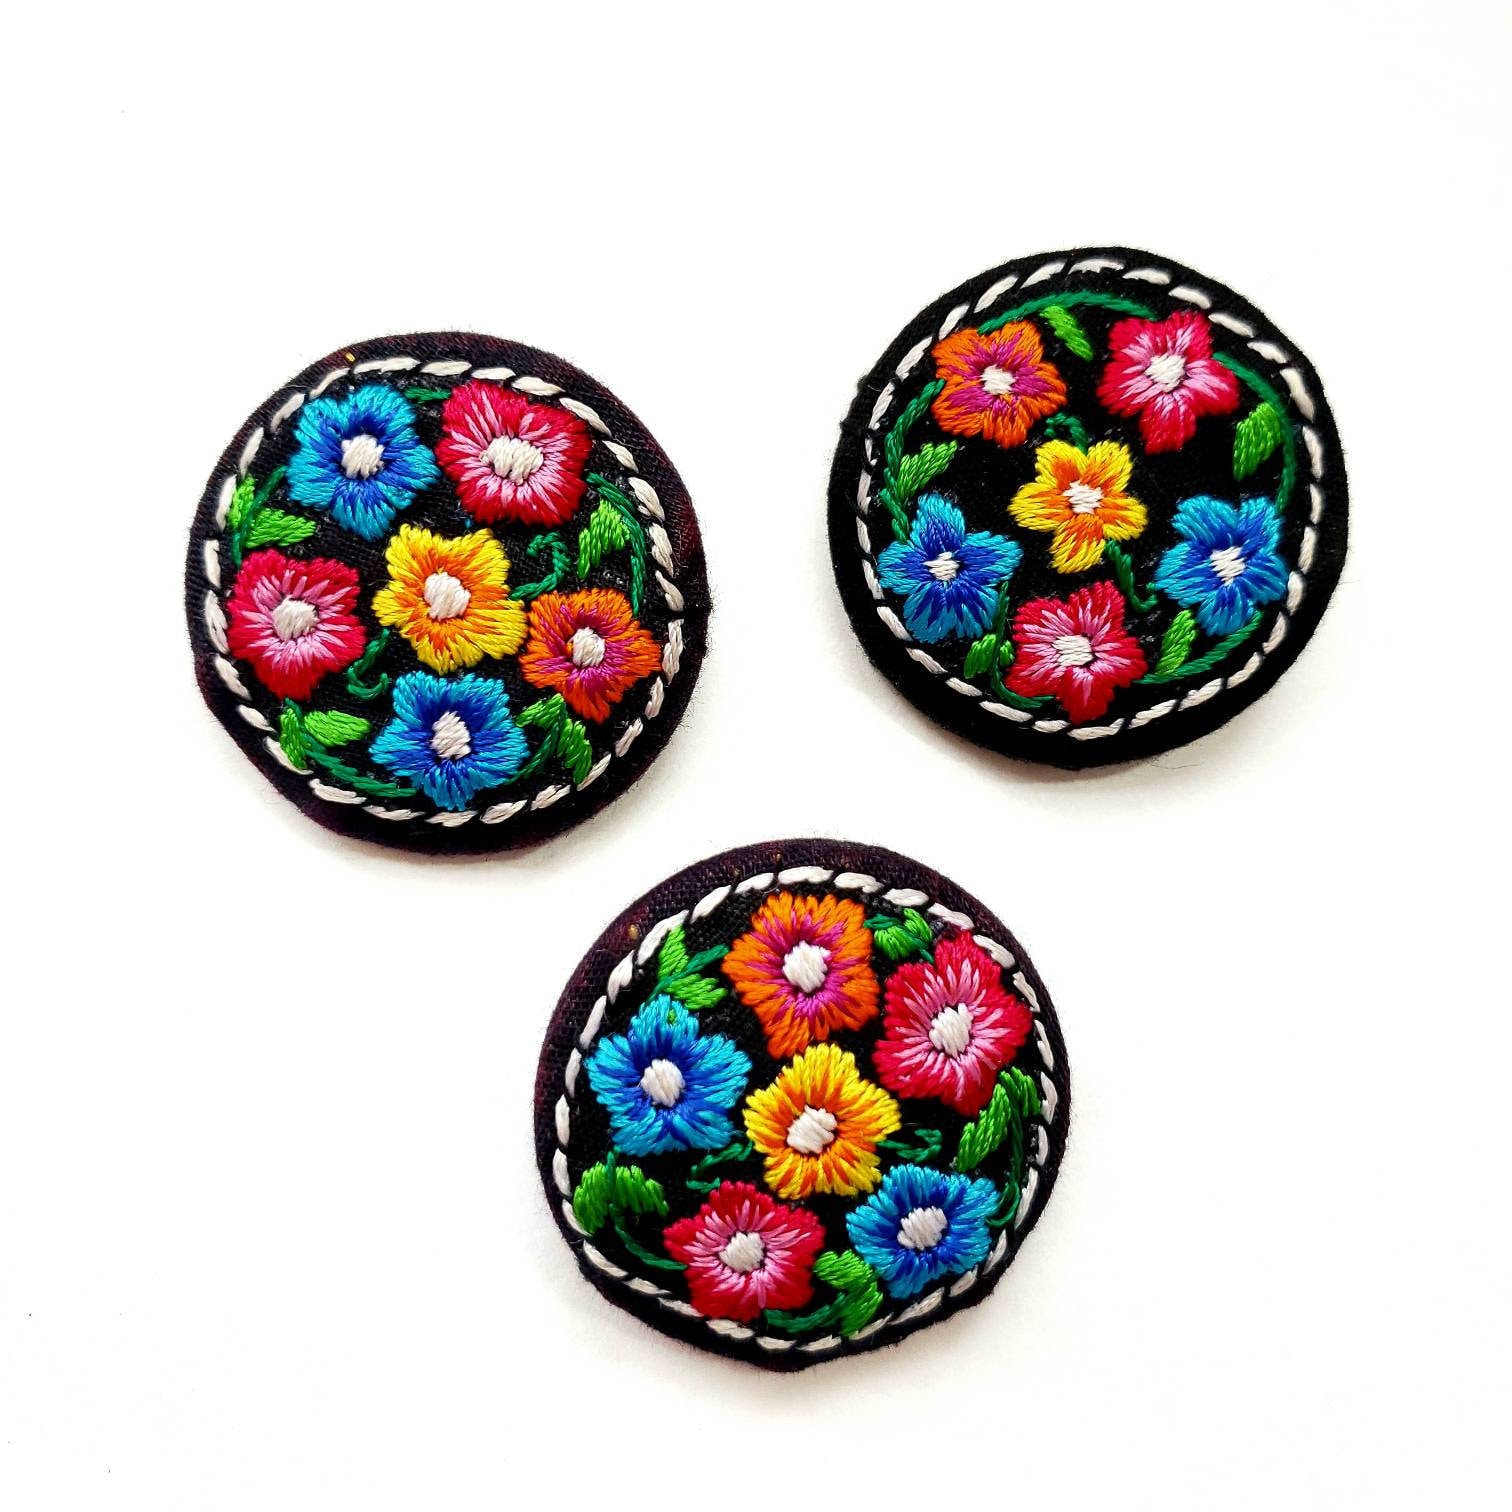 Handcrafted embroidered flower buttons, fabric buttons, collectible  buttons, decorative buttons, large colorful buttons, embellished buttons